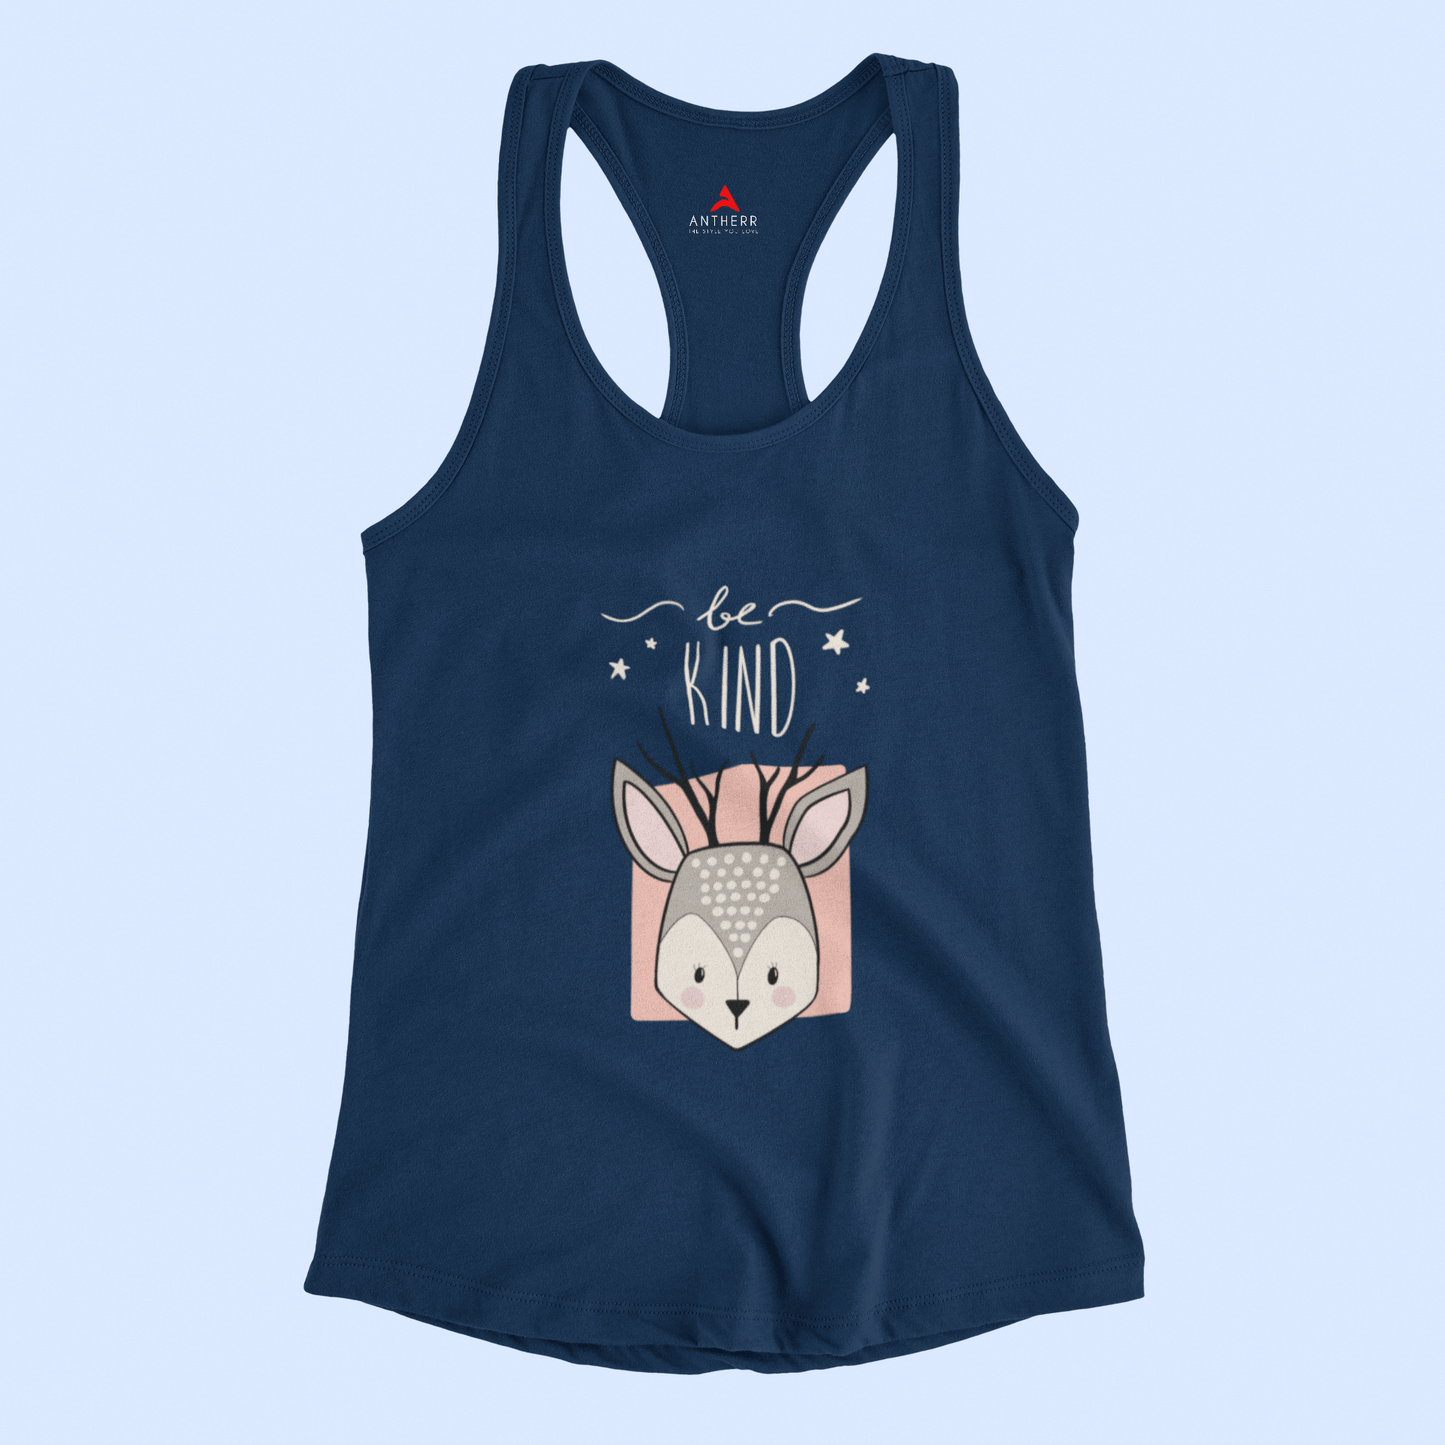 "BE KIND" - Tank Tops NAVY BLUE